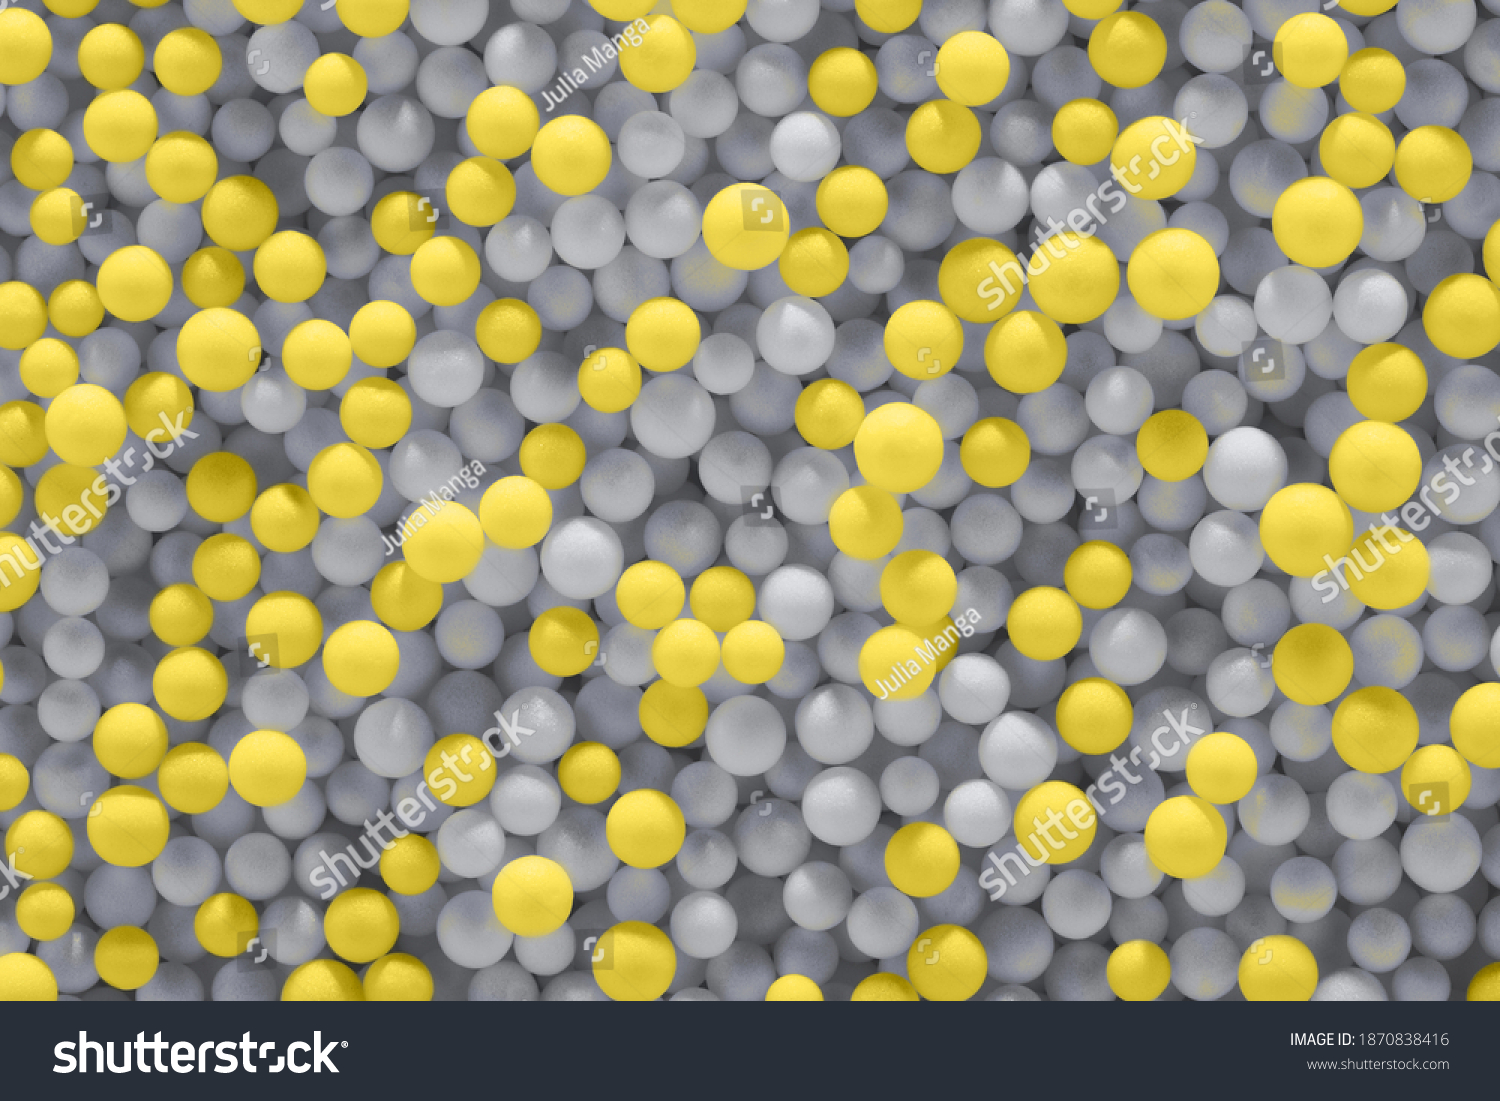 Illuminating yellow and Ultimate Gray balls background. Color year 2021. Abstract backdrop, close-up. #1870838416